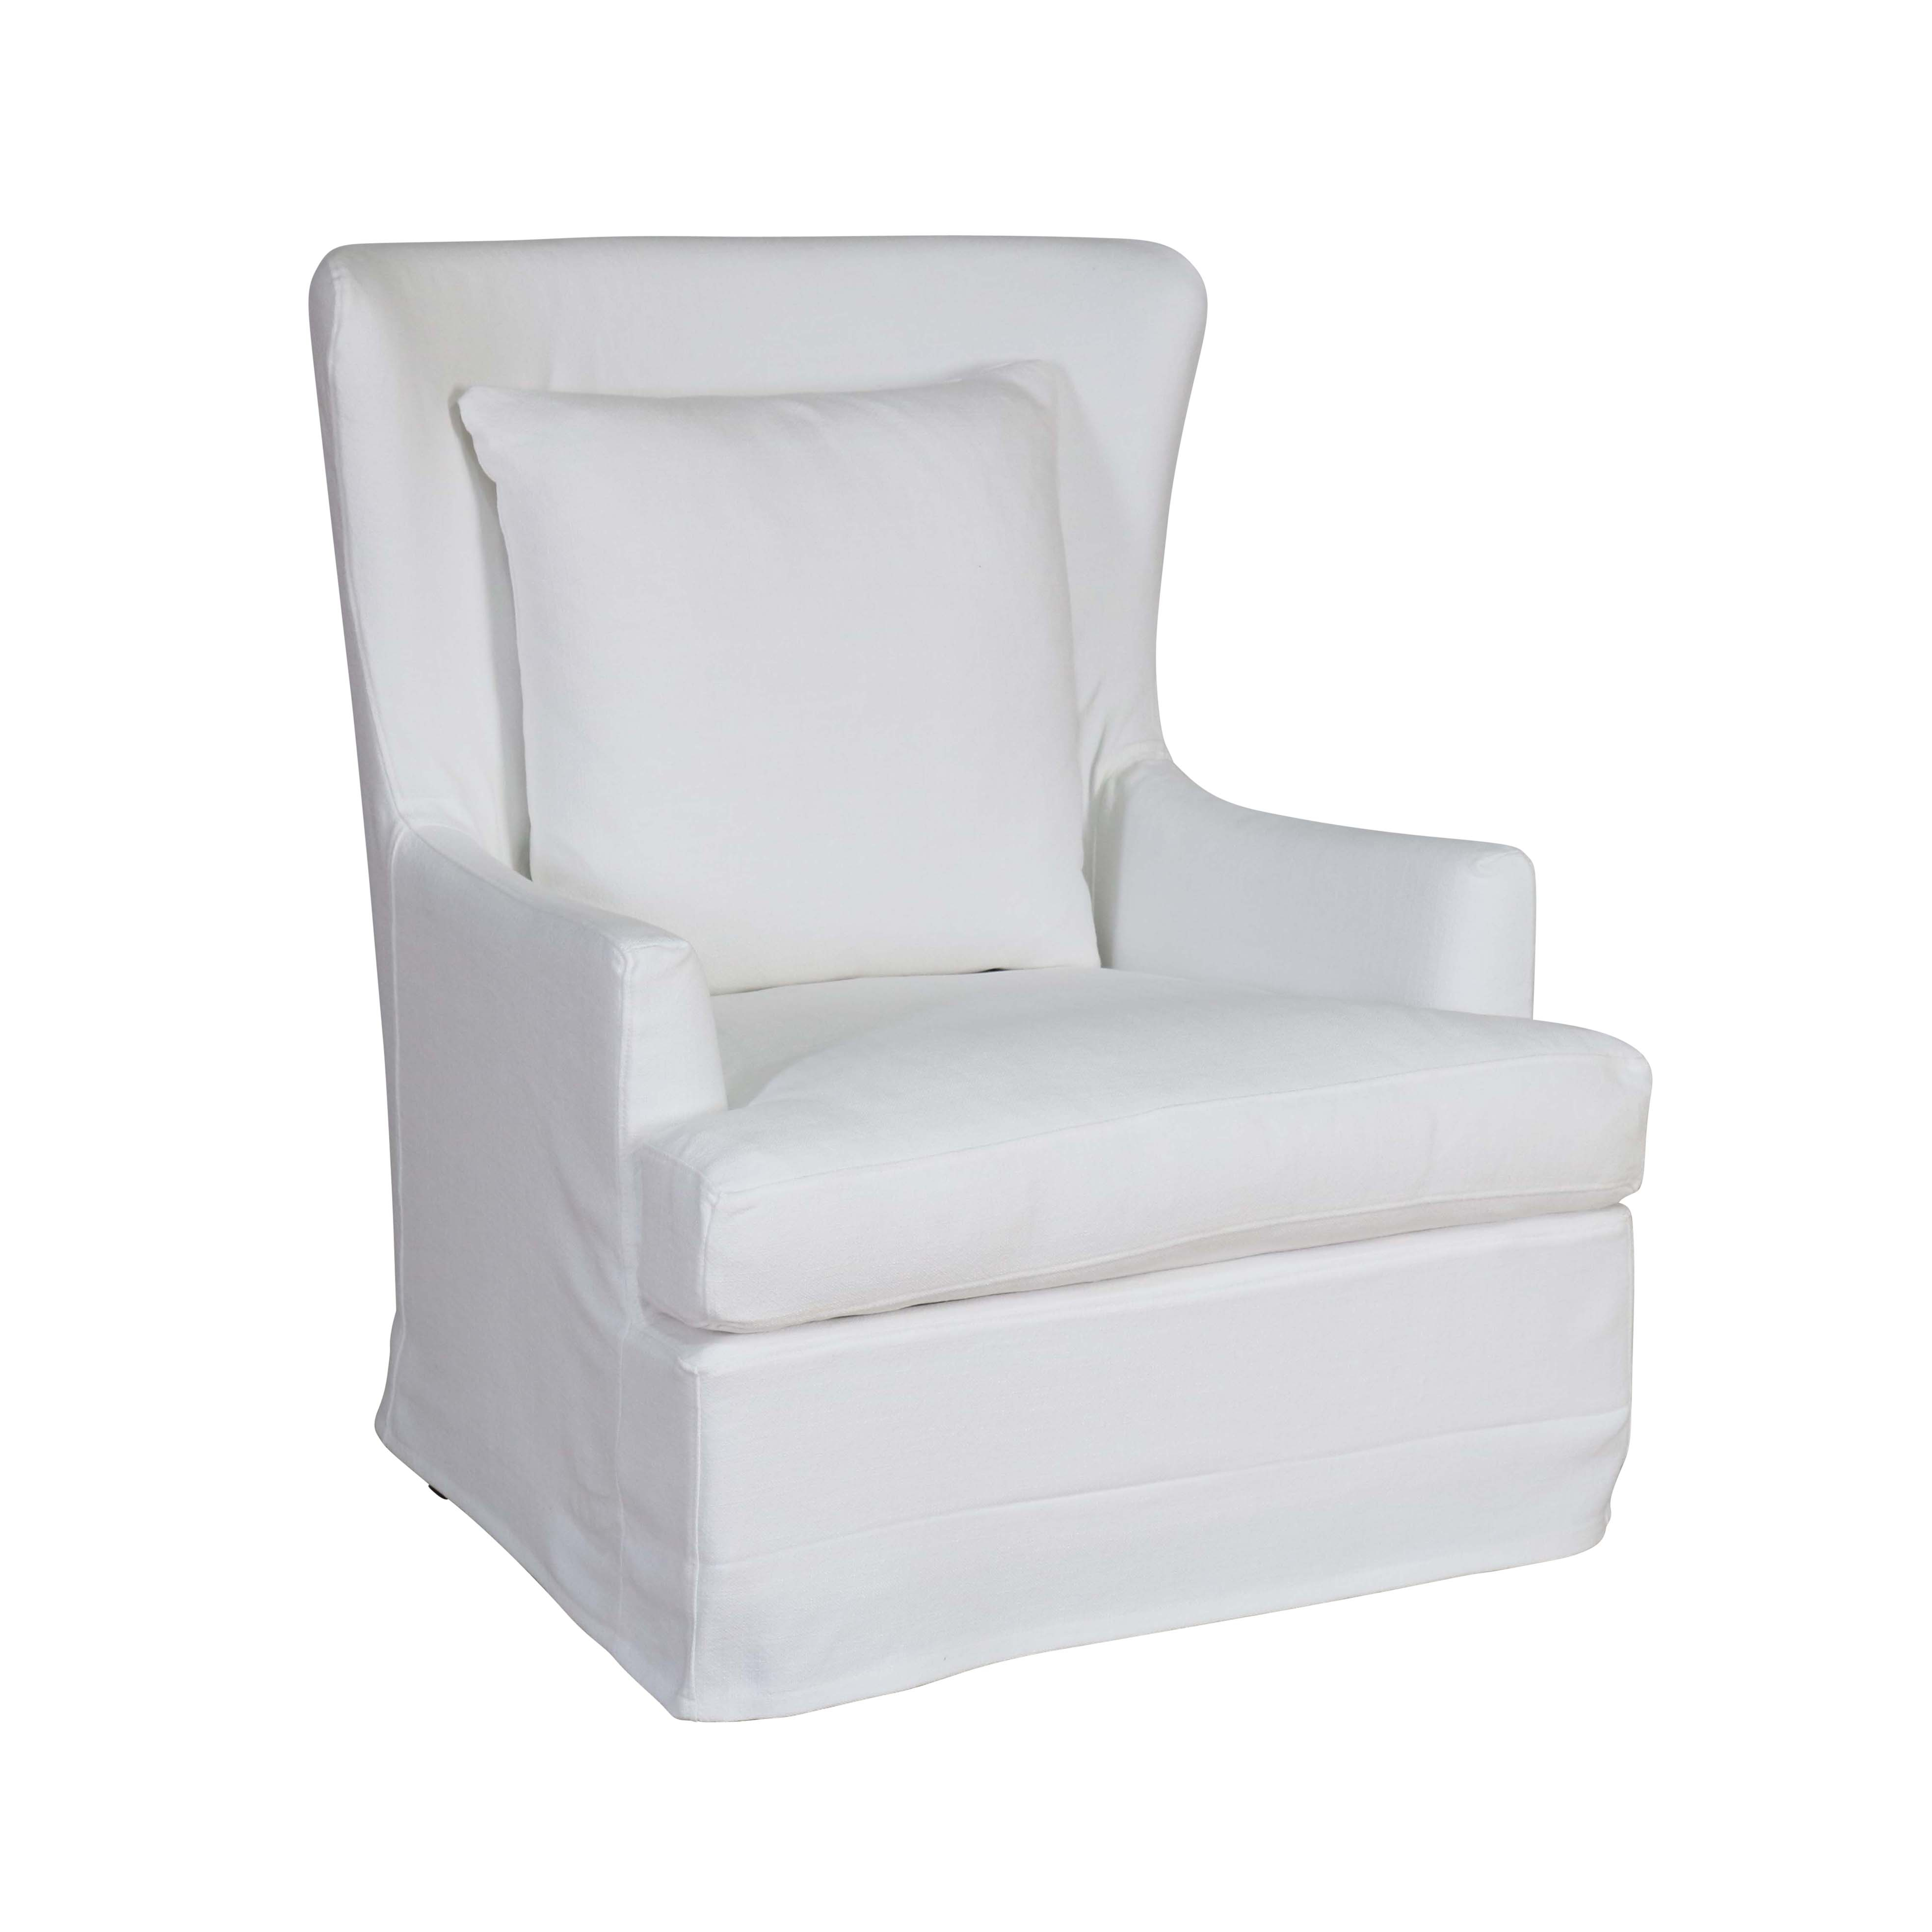 Slipcover wingback armchair in white linen Château collection